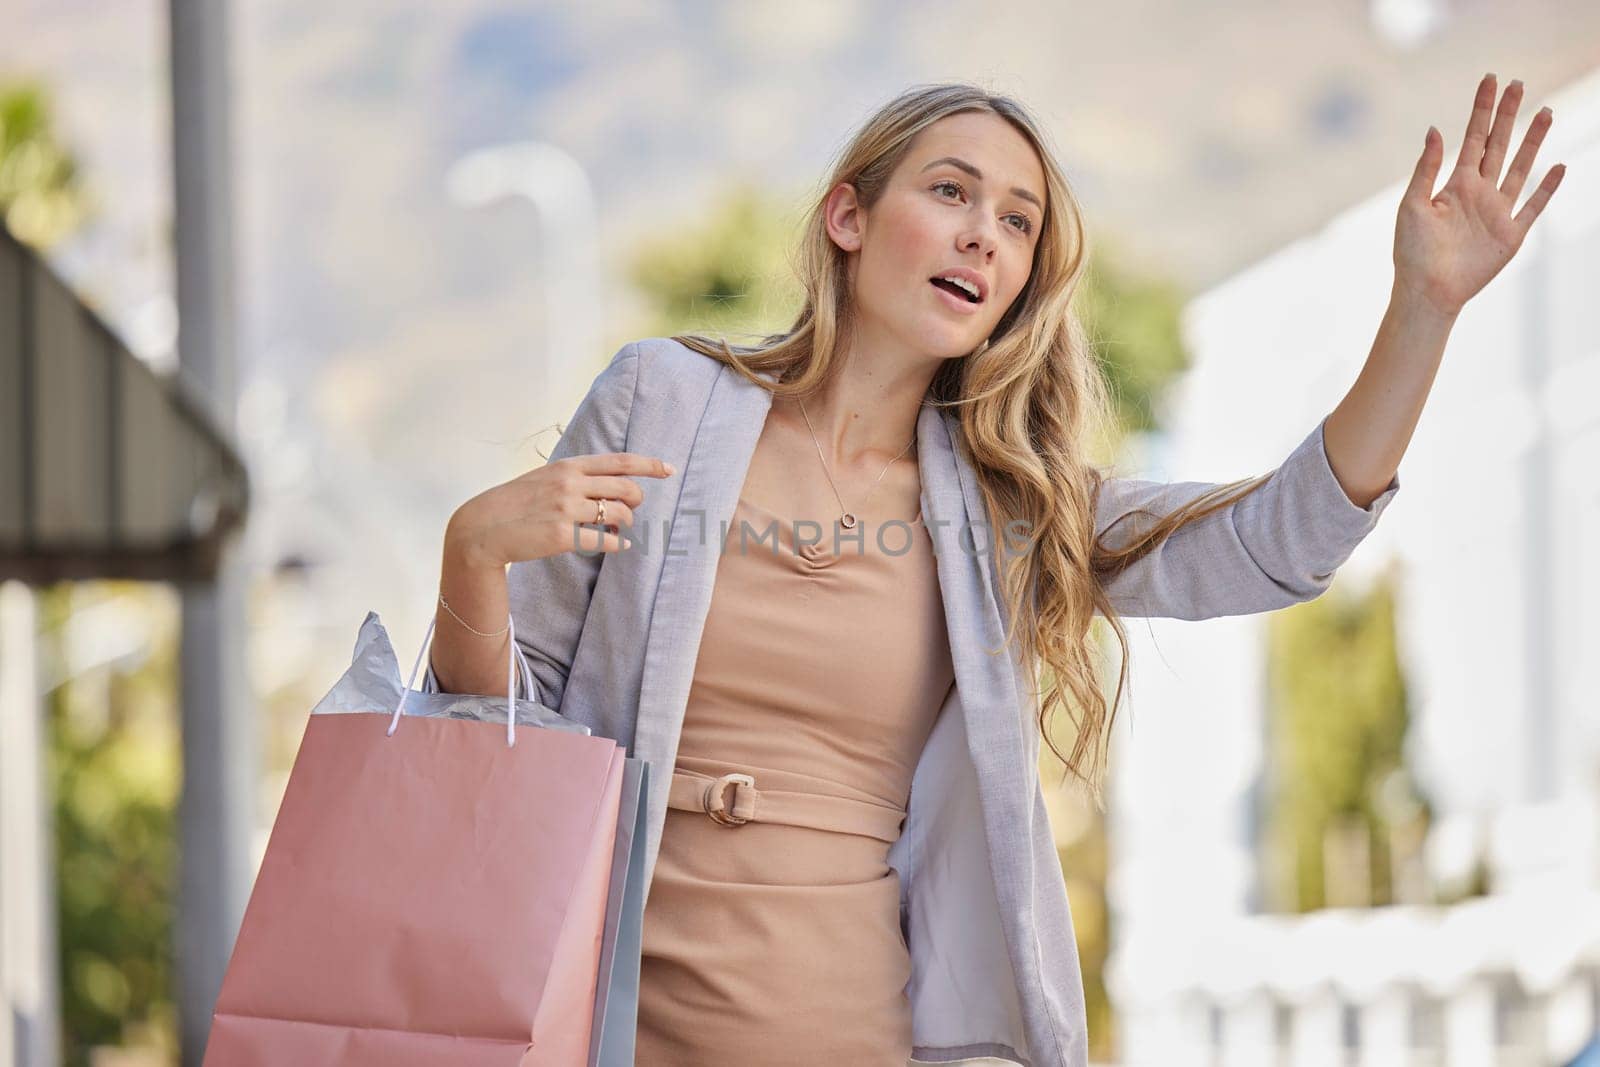 Shopping, city street and hand of woman for taxi in urban travel, wealth and luxury paper bag. Young person or customer with boutique, shopping bag in road call or waiting for transportation service.